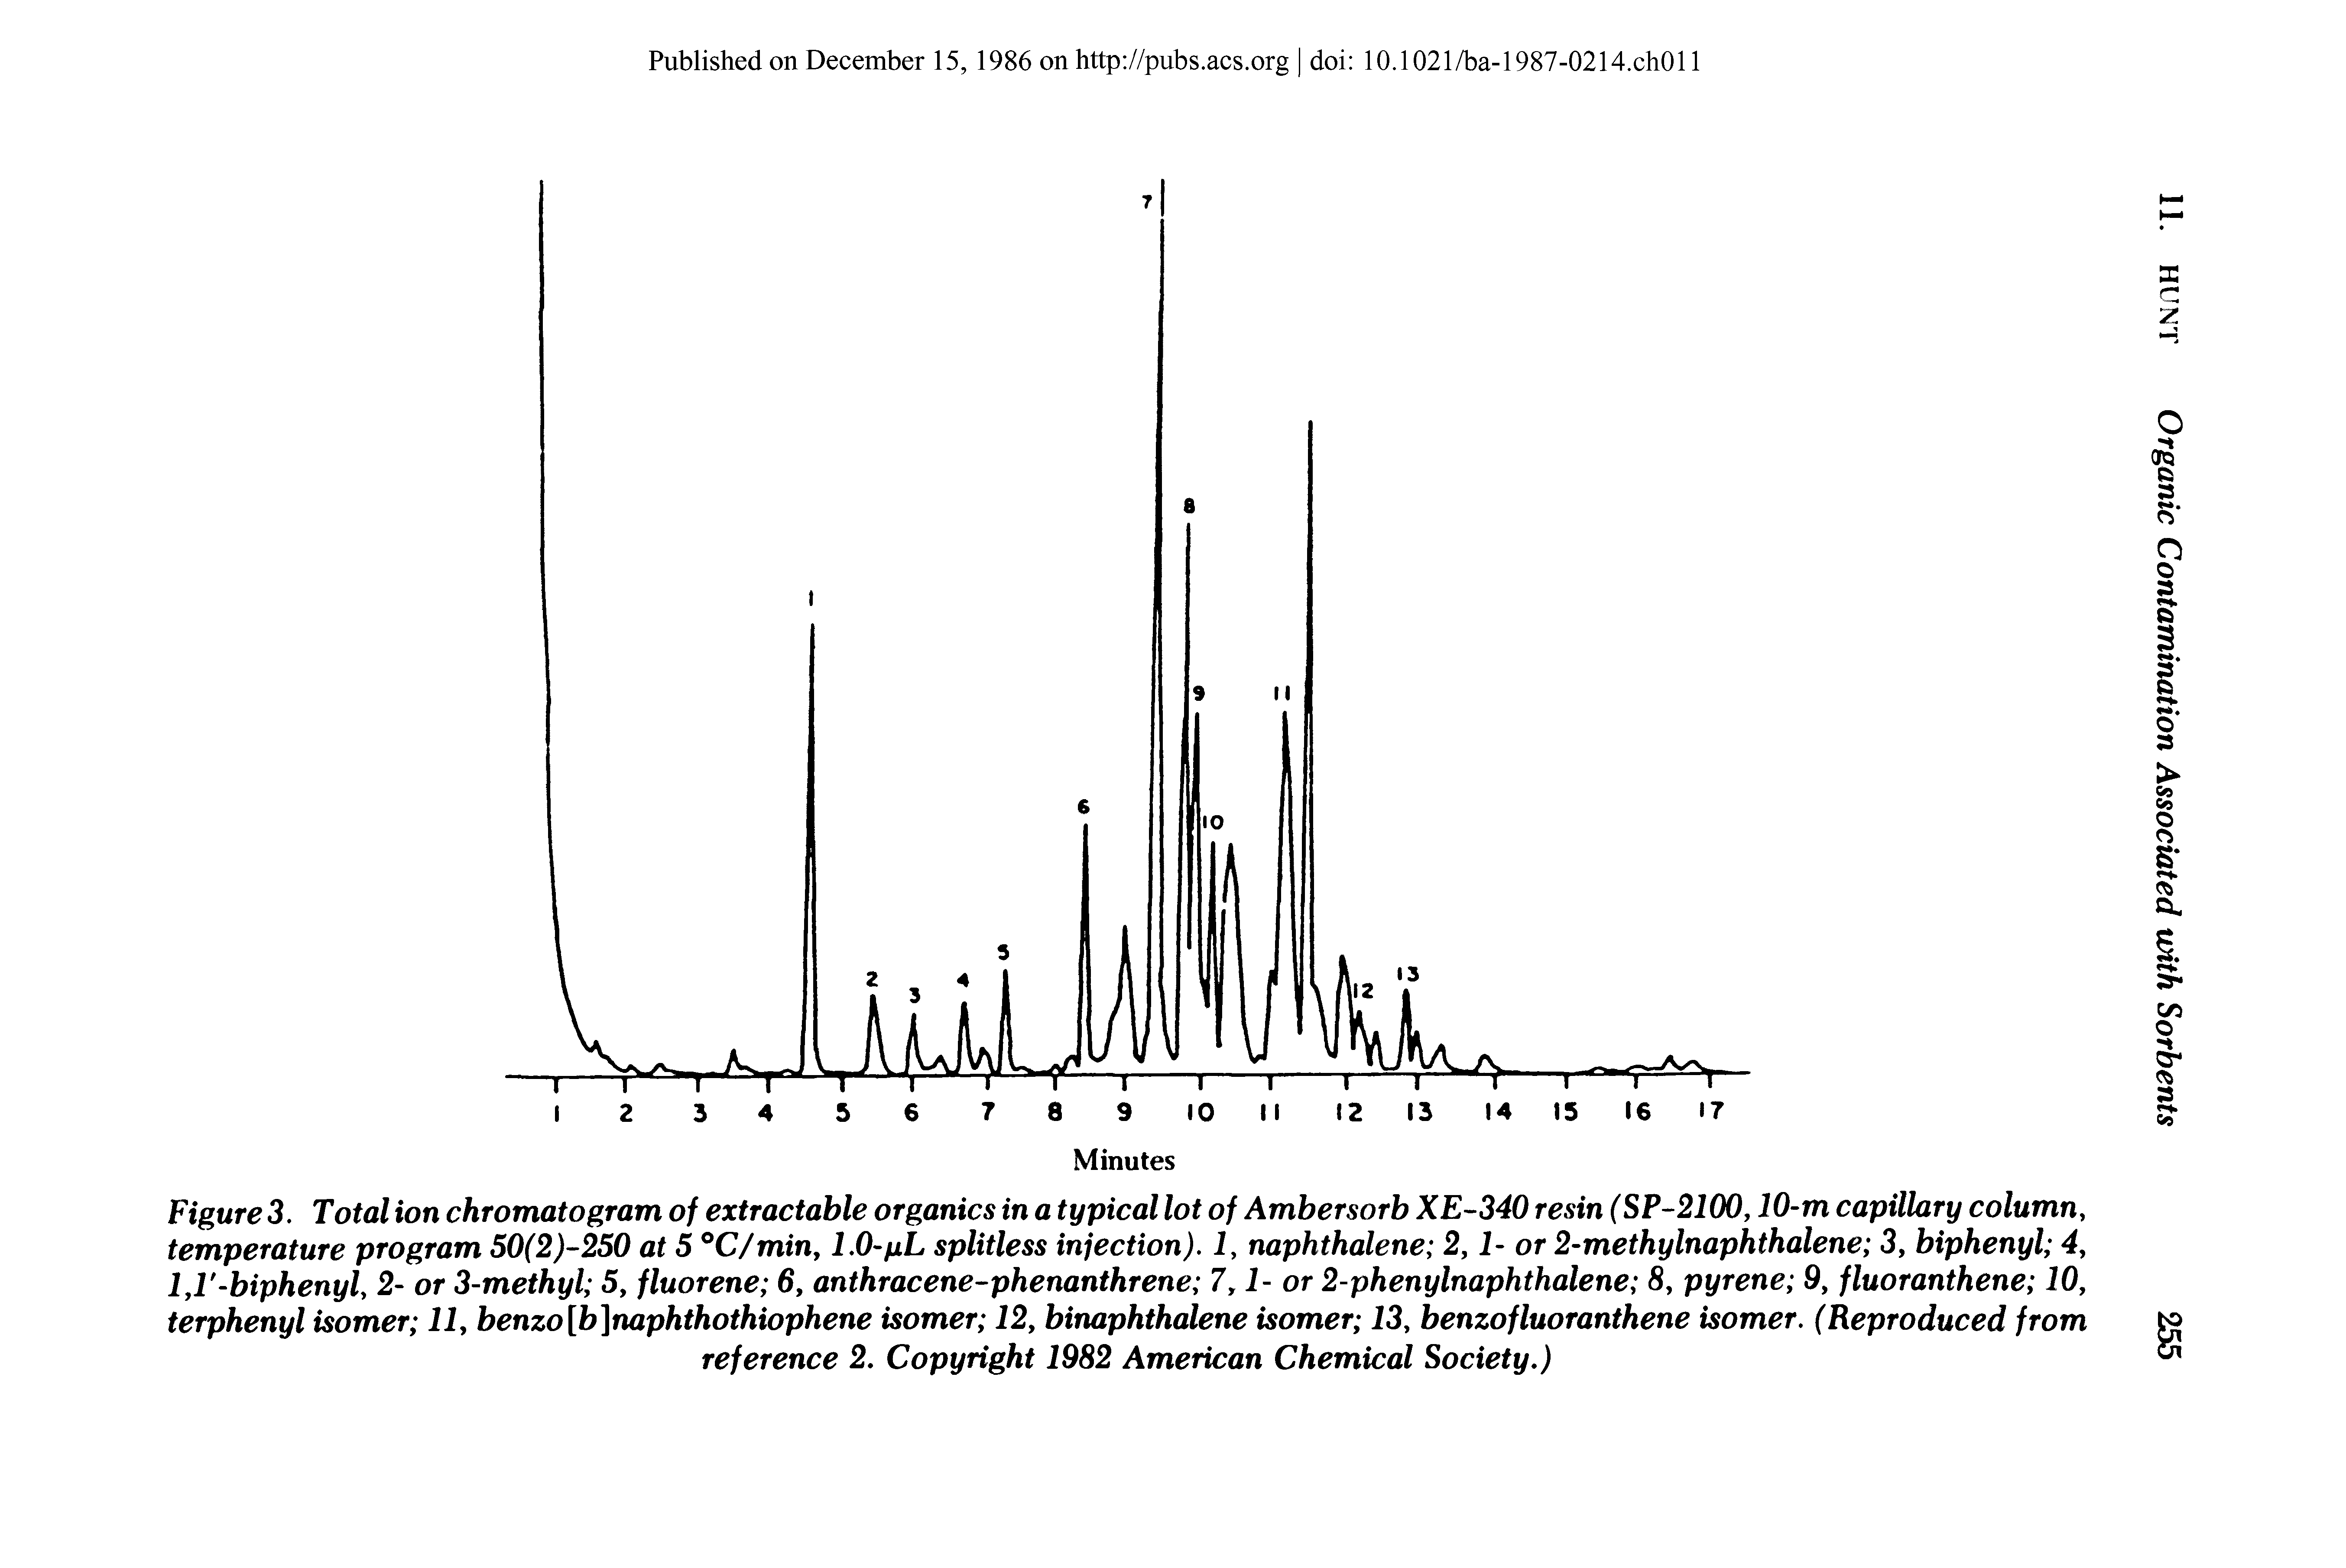 Figure 3. Total ion chromatogram of extractable organics in a typical lot of Ambersorb XE-340 resin (SP-2100,10-m capillary column, temperature program 50(2)-250 at 5 °C/min, 1.0-pL splitless injection). 1, naphthalene 2,1- or 2-methylnaphthalene 3, biphenyl 4, 1,V-biphenyl, 2- or 3-methyl 5, fluorene 6, anthracene-phenanthrene 7tl- or 2-phenylnaphthalene 8, pyrene 9, fluoranthene 10, terphenyl isomer 11, benzo[b]naphthothiophene isomer 12, binaphthalene isomer 13, benzofluoranthene isomer. (Reproduced from...